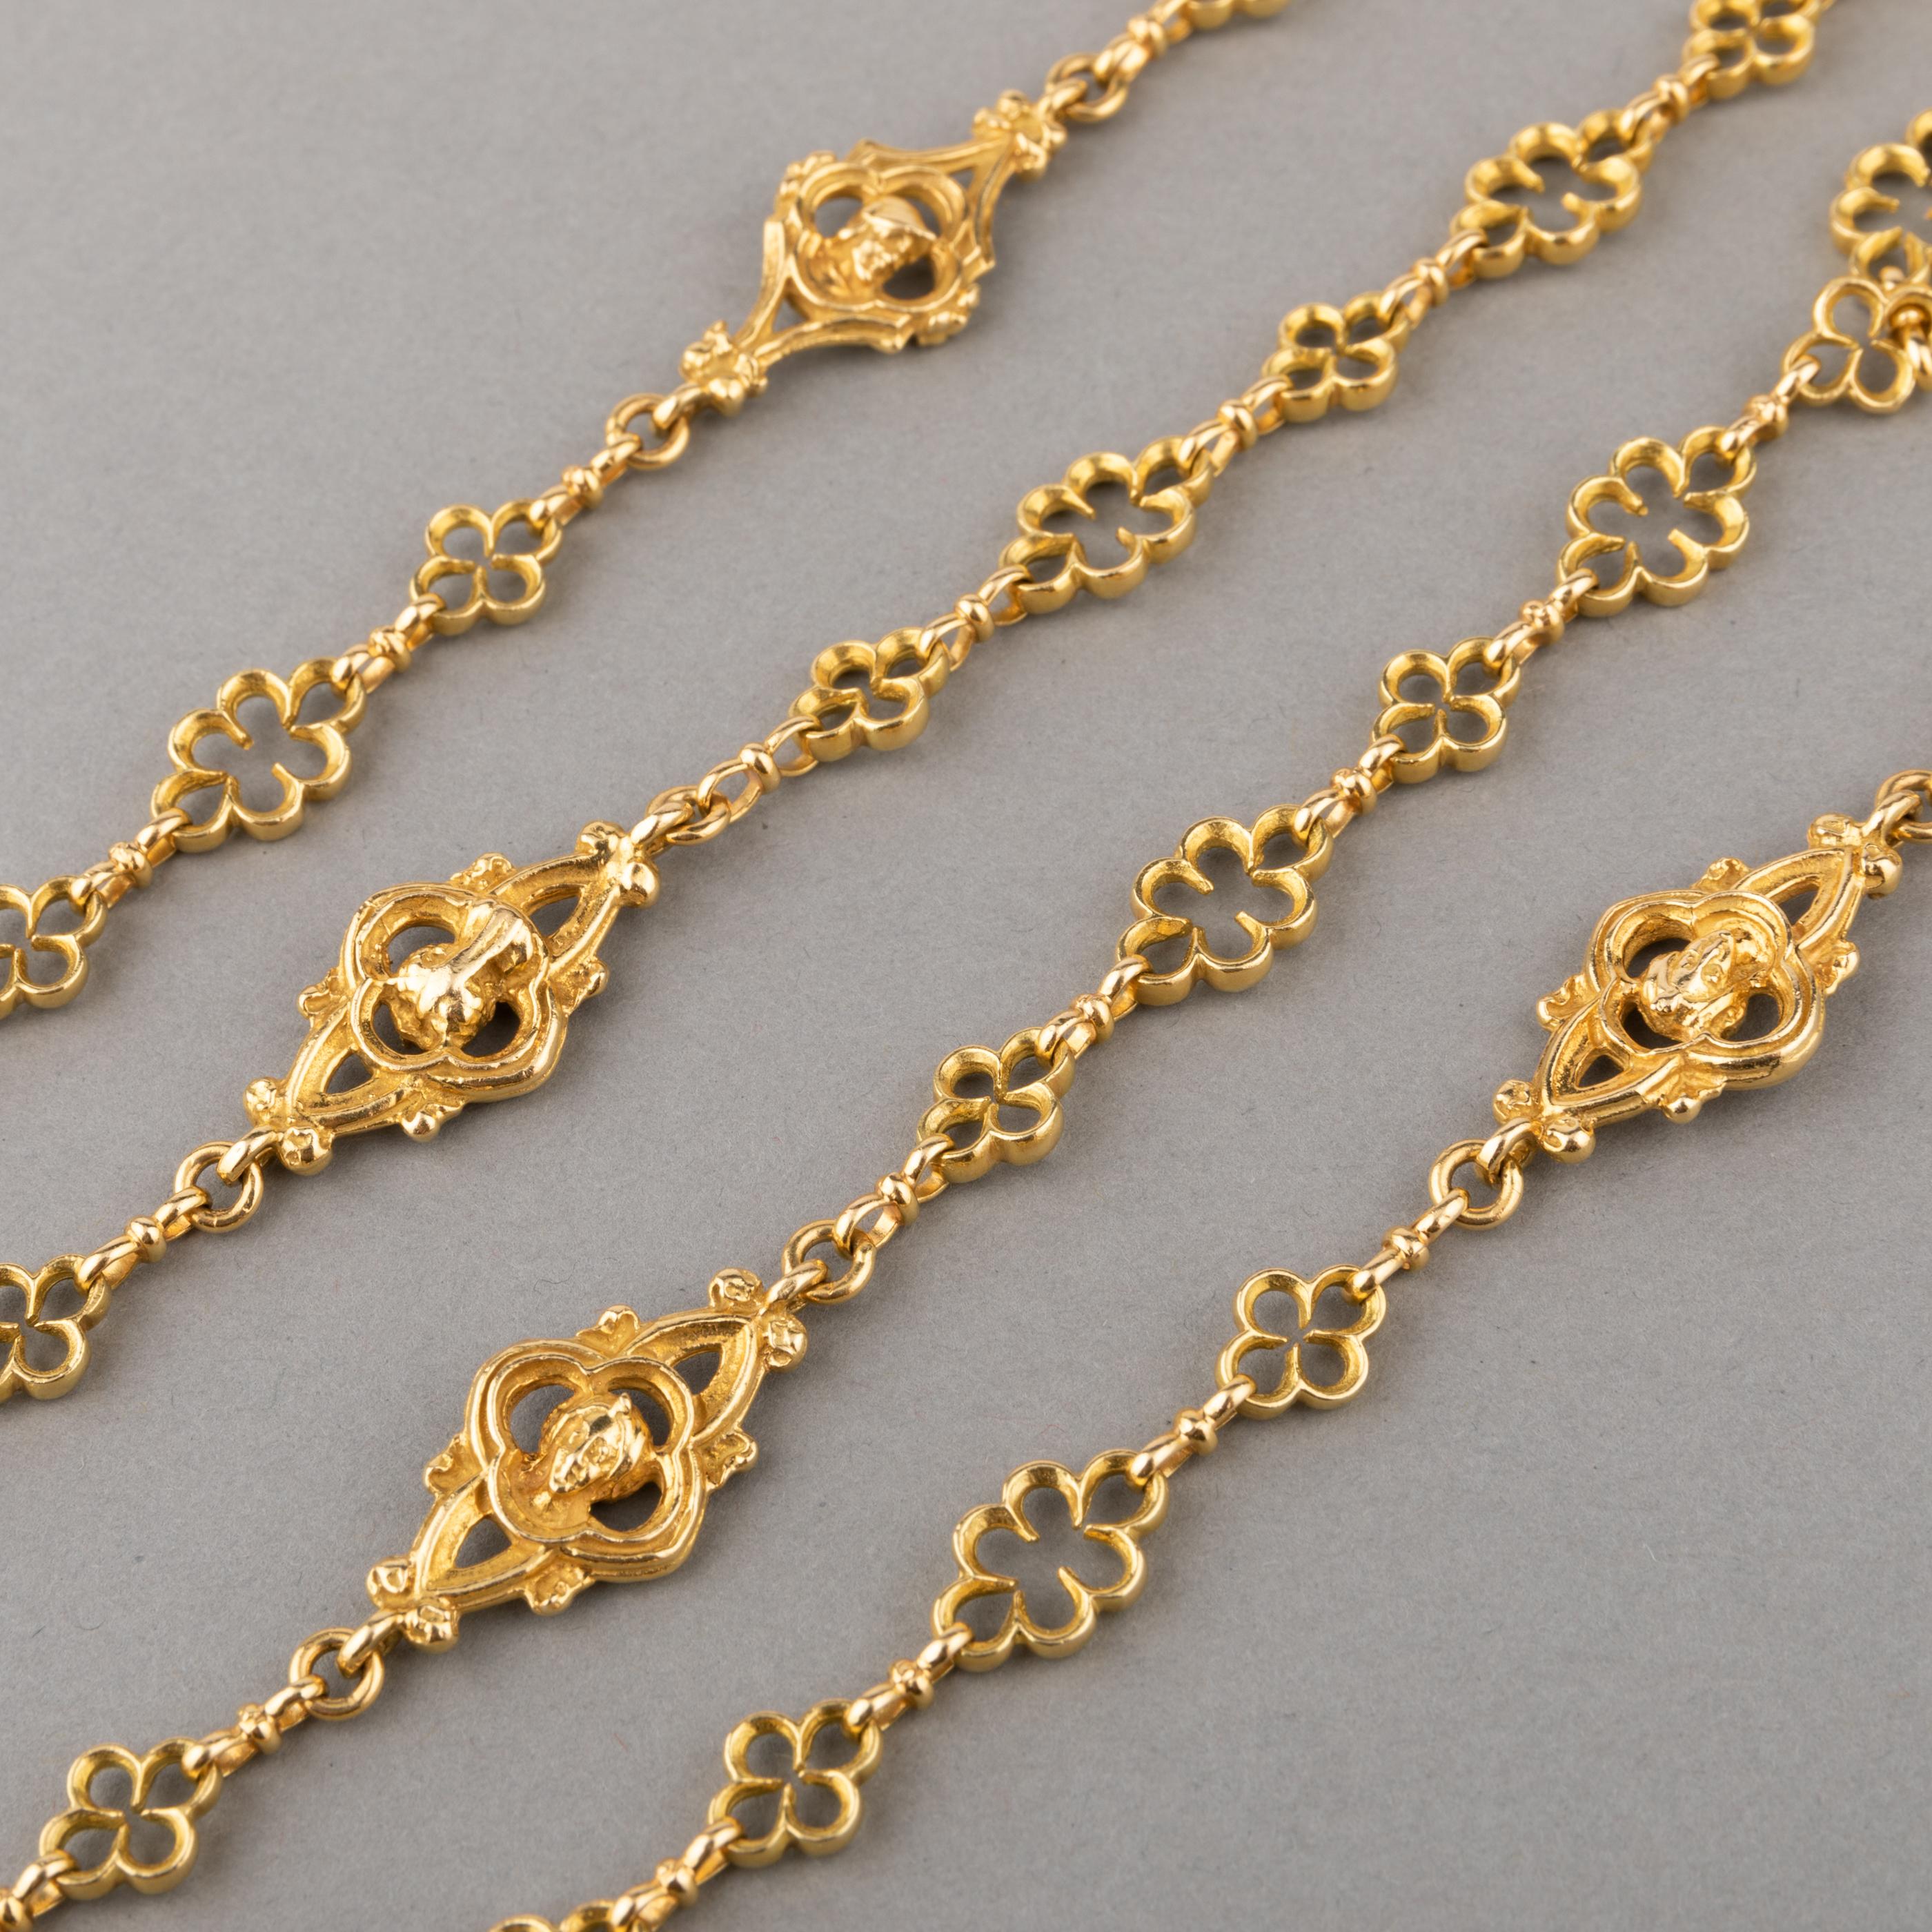 A magnificent French antique necklace, made circa 1870. 

Made in yellow gold 18k, it weights 103.40 grams. Hallmarks for gold 18k (eagle heads), hallmark of maker.

The length is 148cm